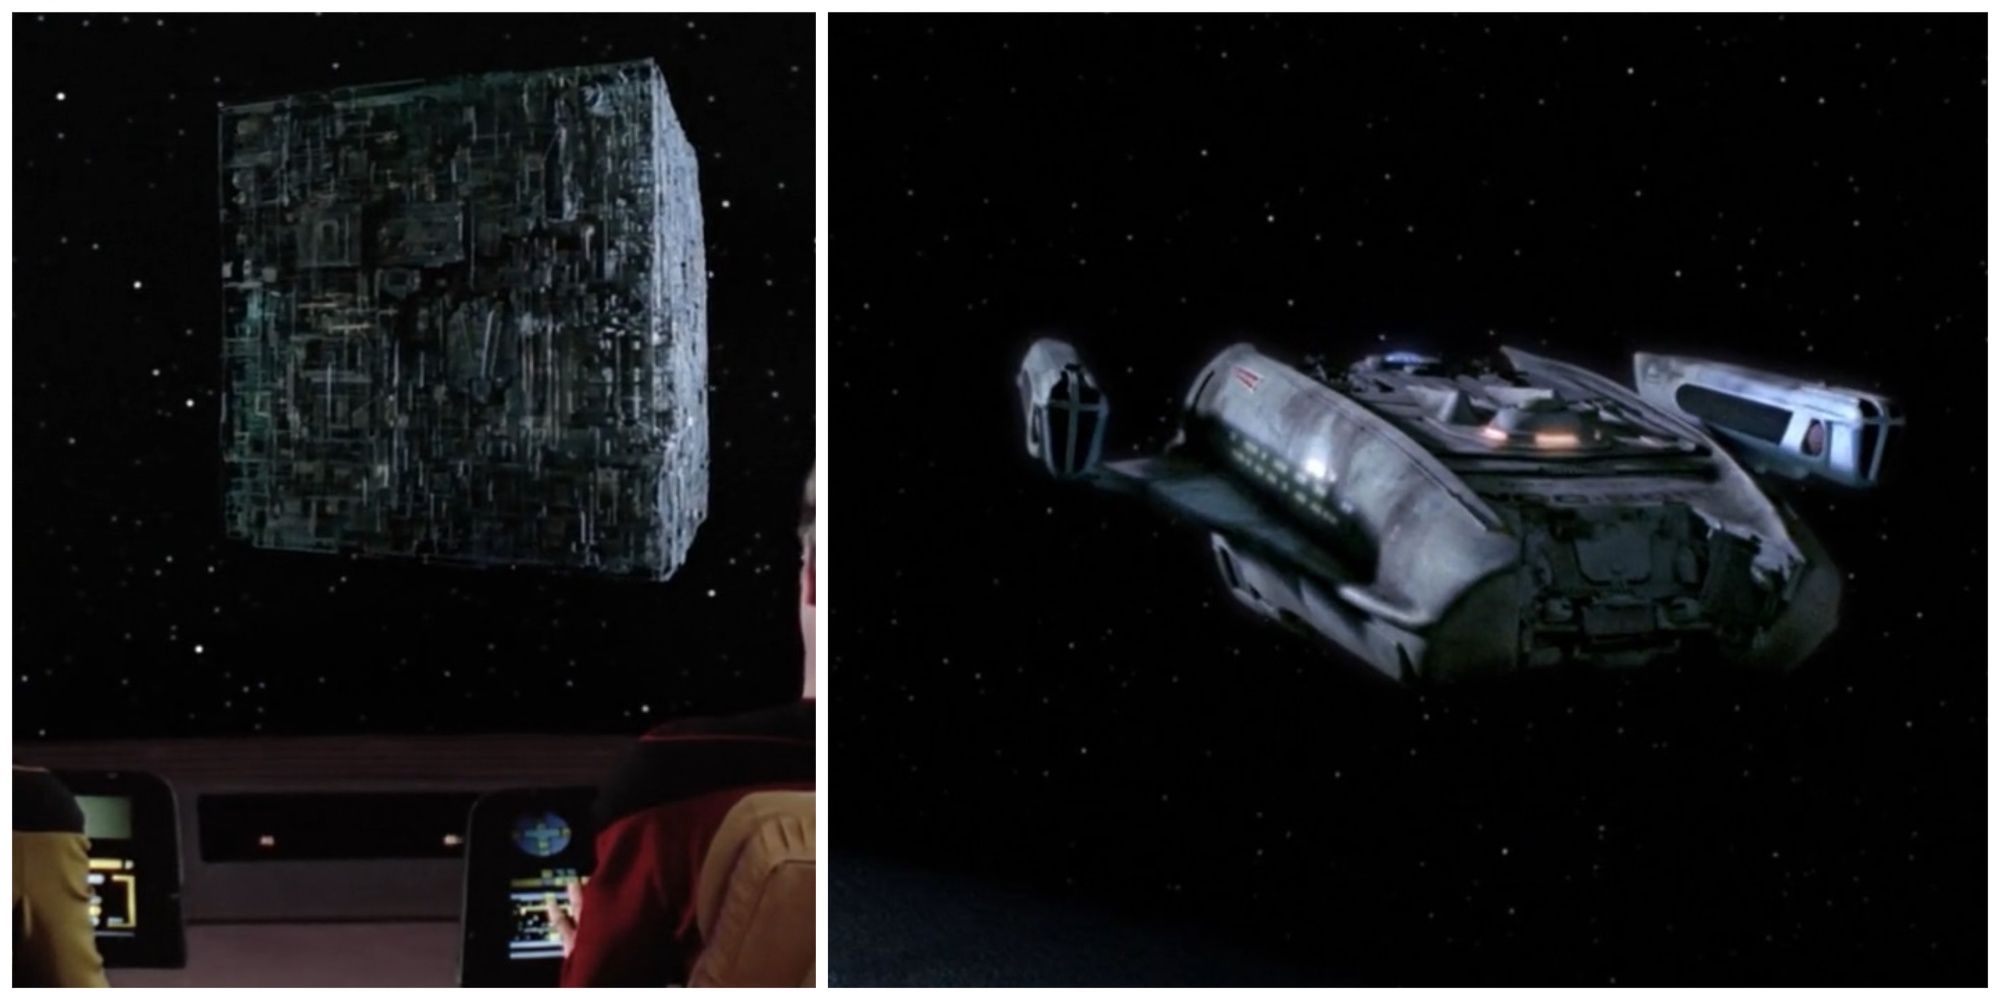 Split image showing two starships from Star Trek: The Next Generation: a Borg cube, and the USS Jenolan.